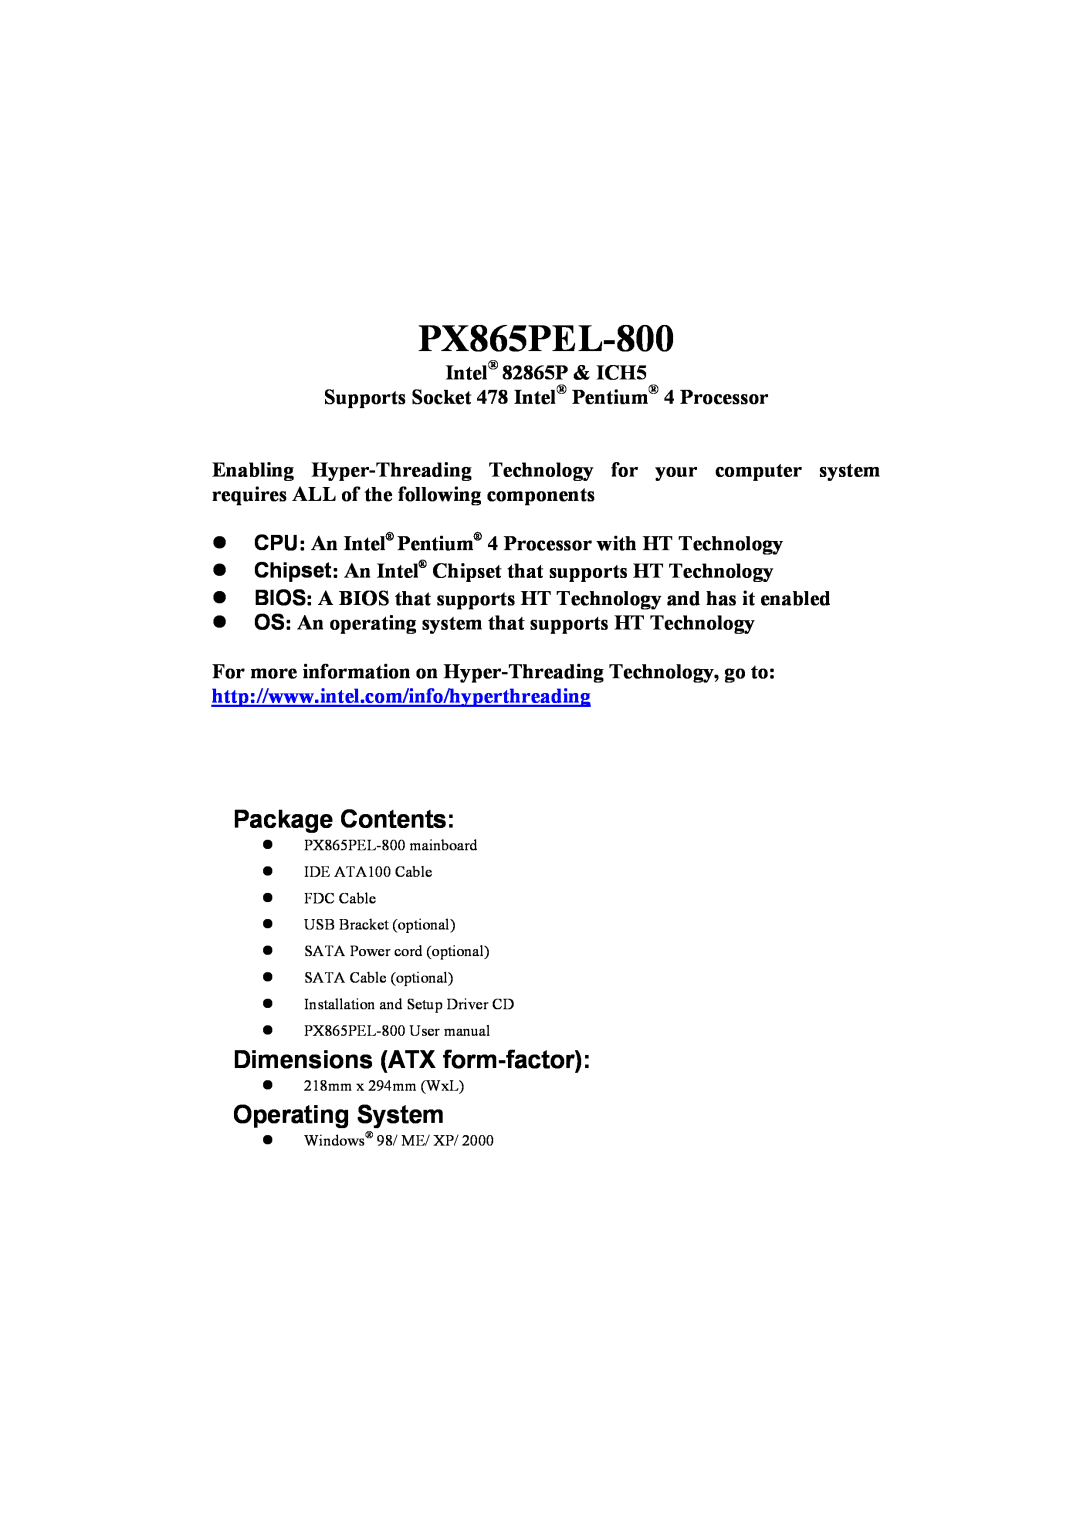 Intel PX865PEL-800 warranty Package Contents, Dimensions ATX form-factor, Operating System 